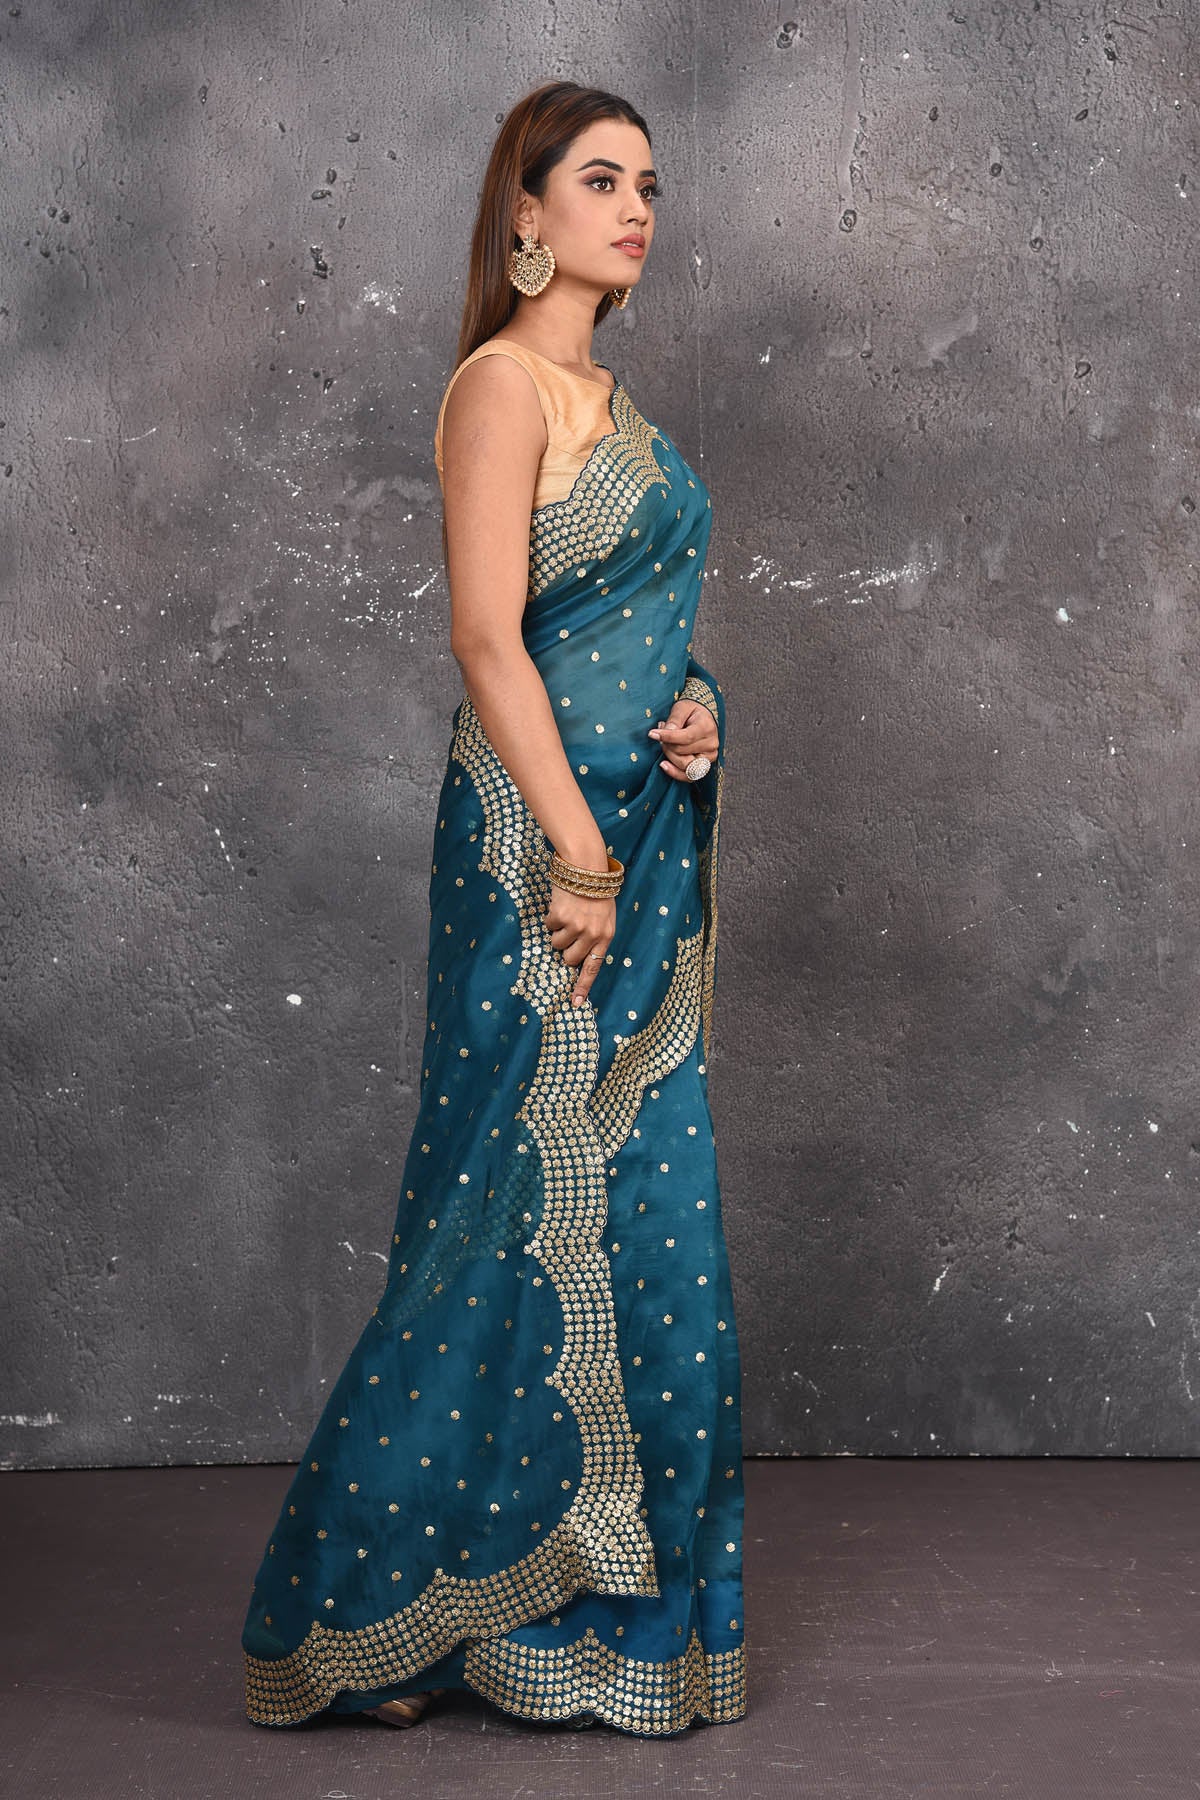 Buy exquisite blue organza saree with golden embroidered online in USA. Pure organza sarees by Pure Elegance in blue color. It has a beautiful gold embroidered border. This organza brings the charm and simplicity of this saree with border and pallu with the delegate embroidery work on border. Shop this designer silk sari from Pure Elegance Indian fashion store in USA.-Side view.